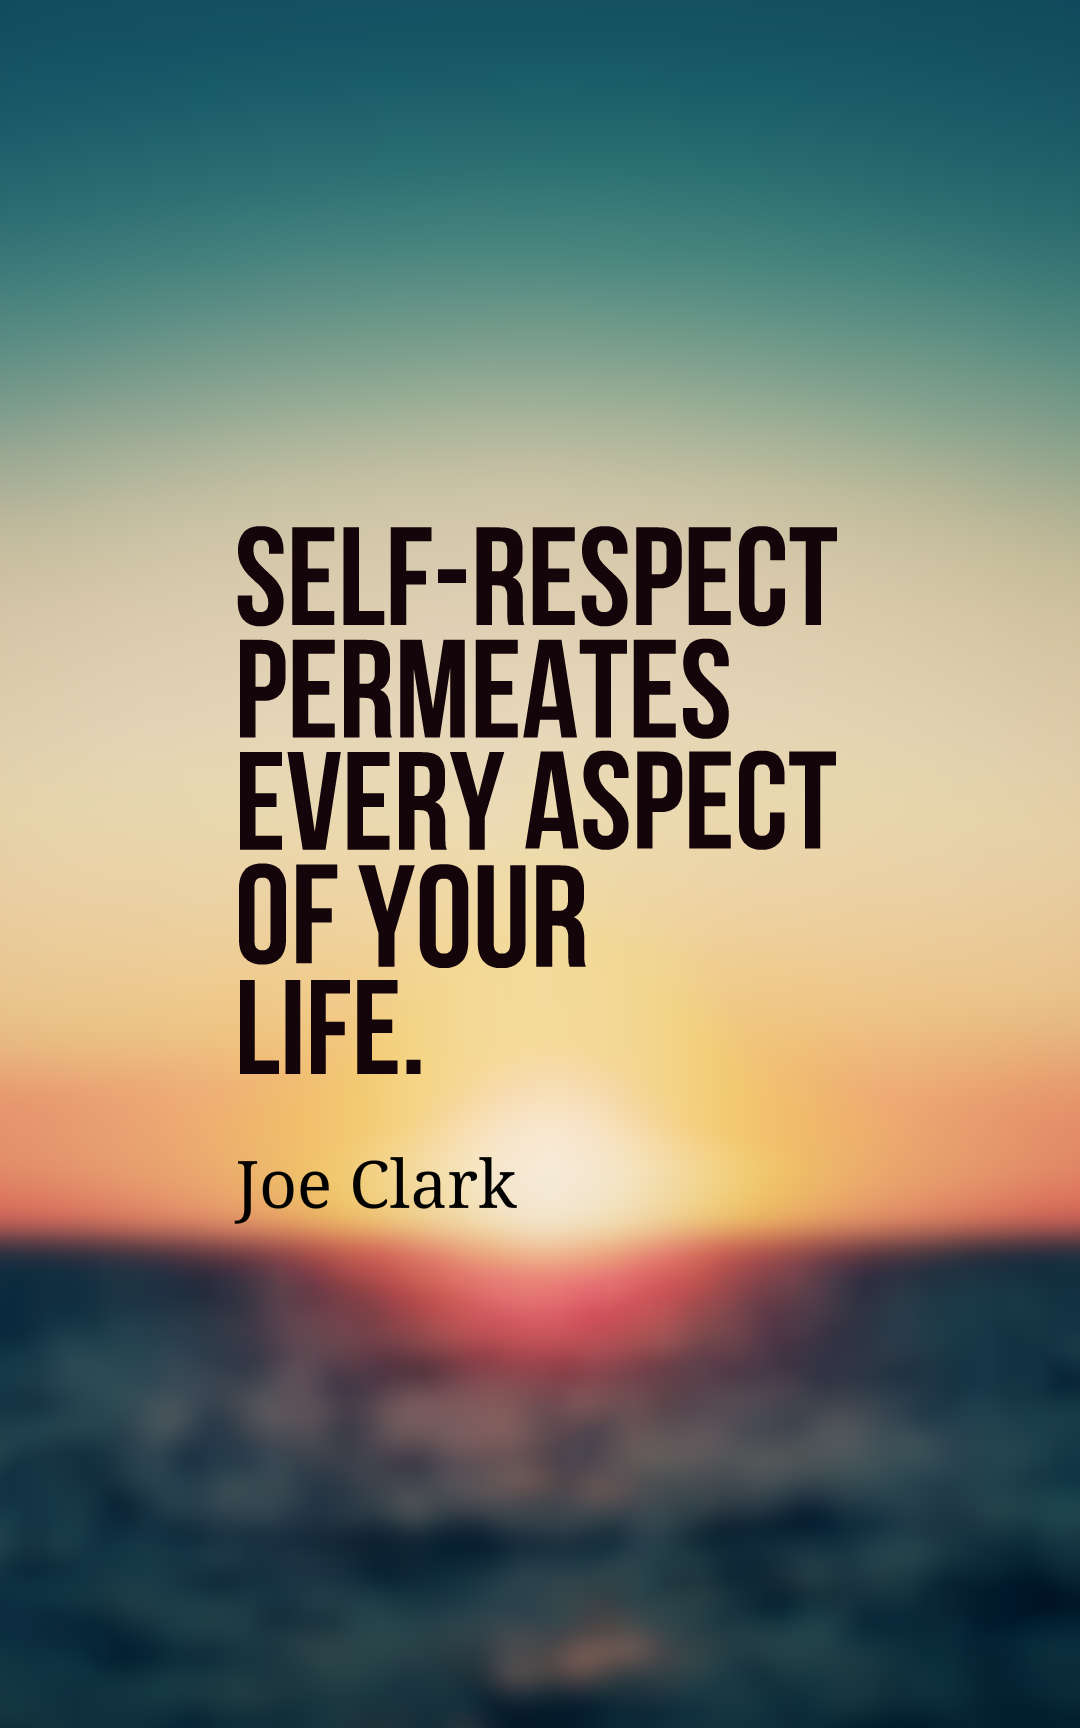 Self respect permeates every aspect of your life.